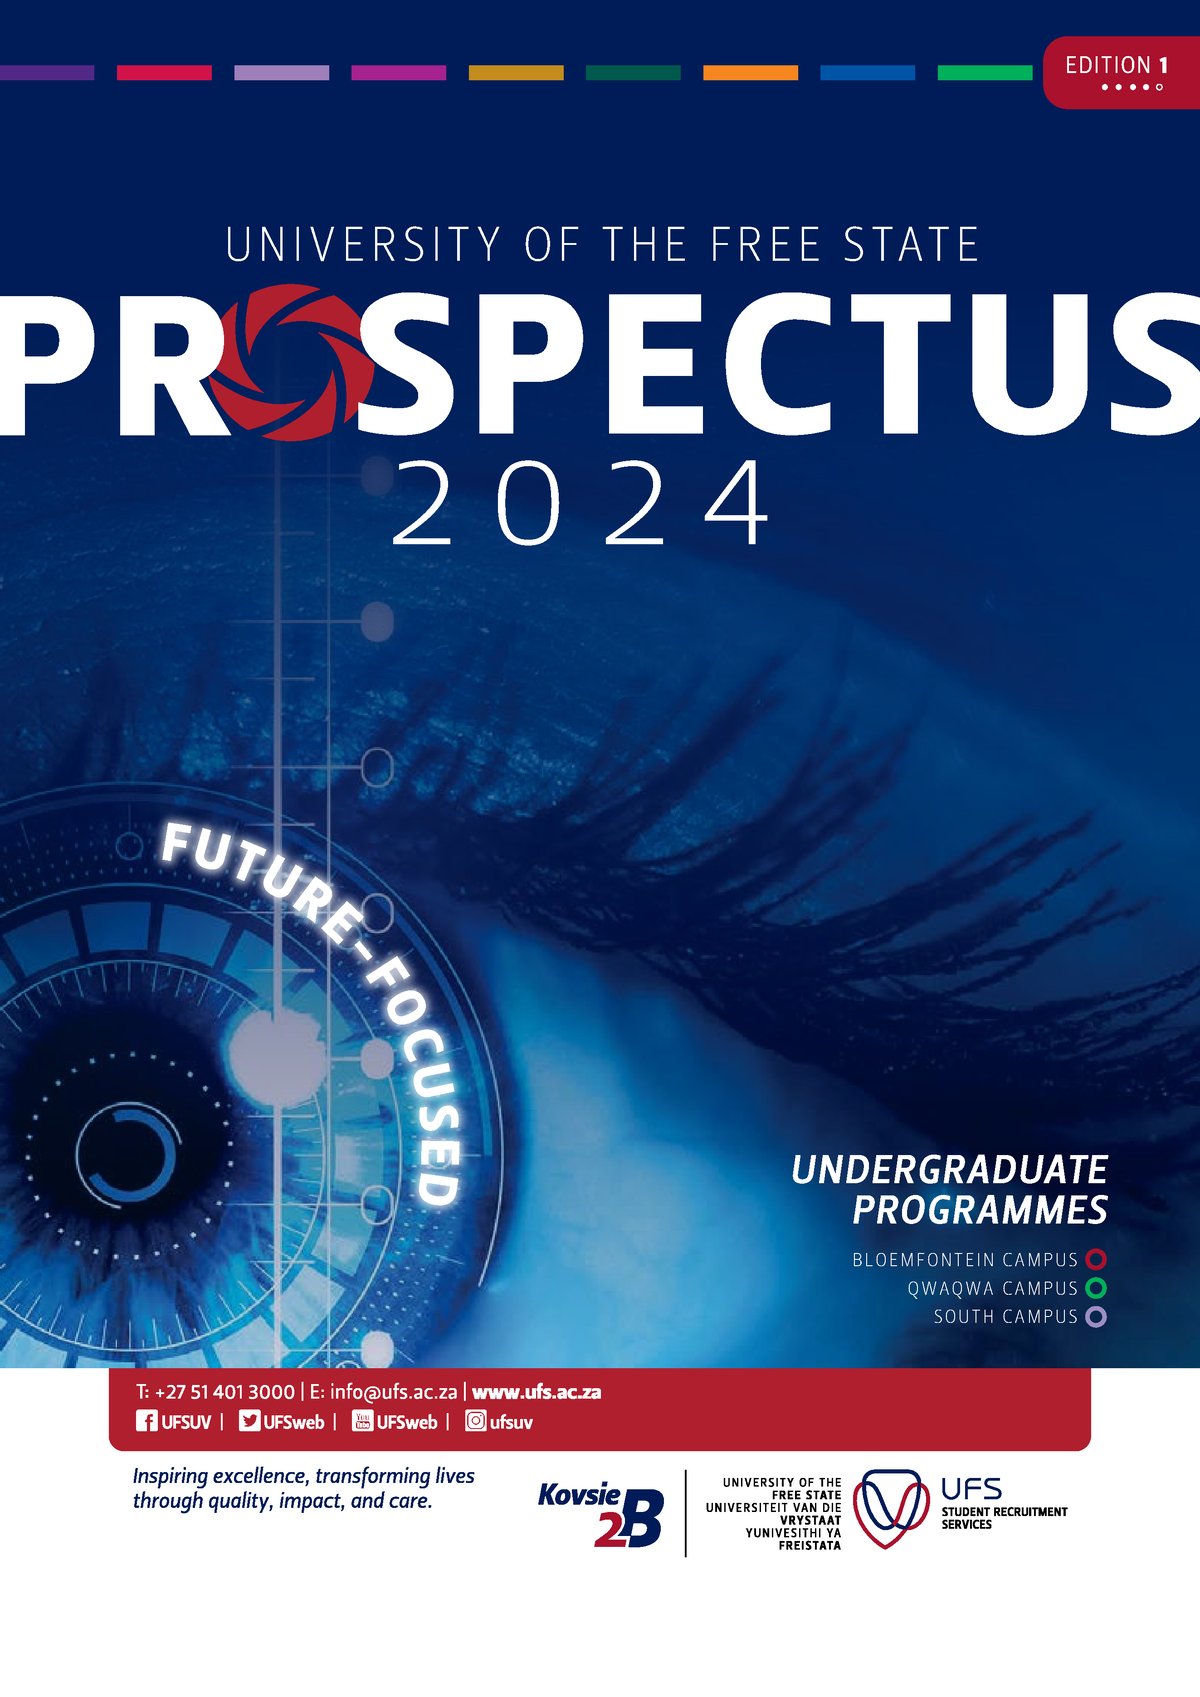 Ufs prospectus 2024 web - 2 0 2 4 U N I V E R S I T Y OF THE FREE STATE